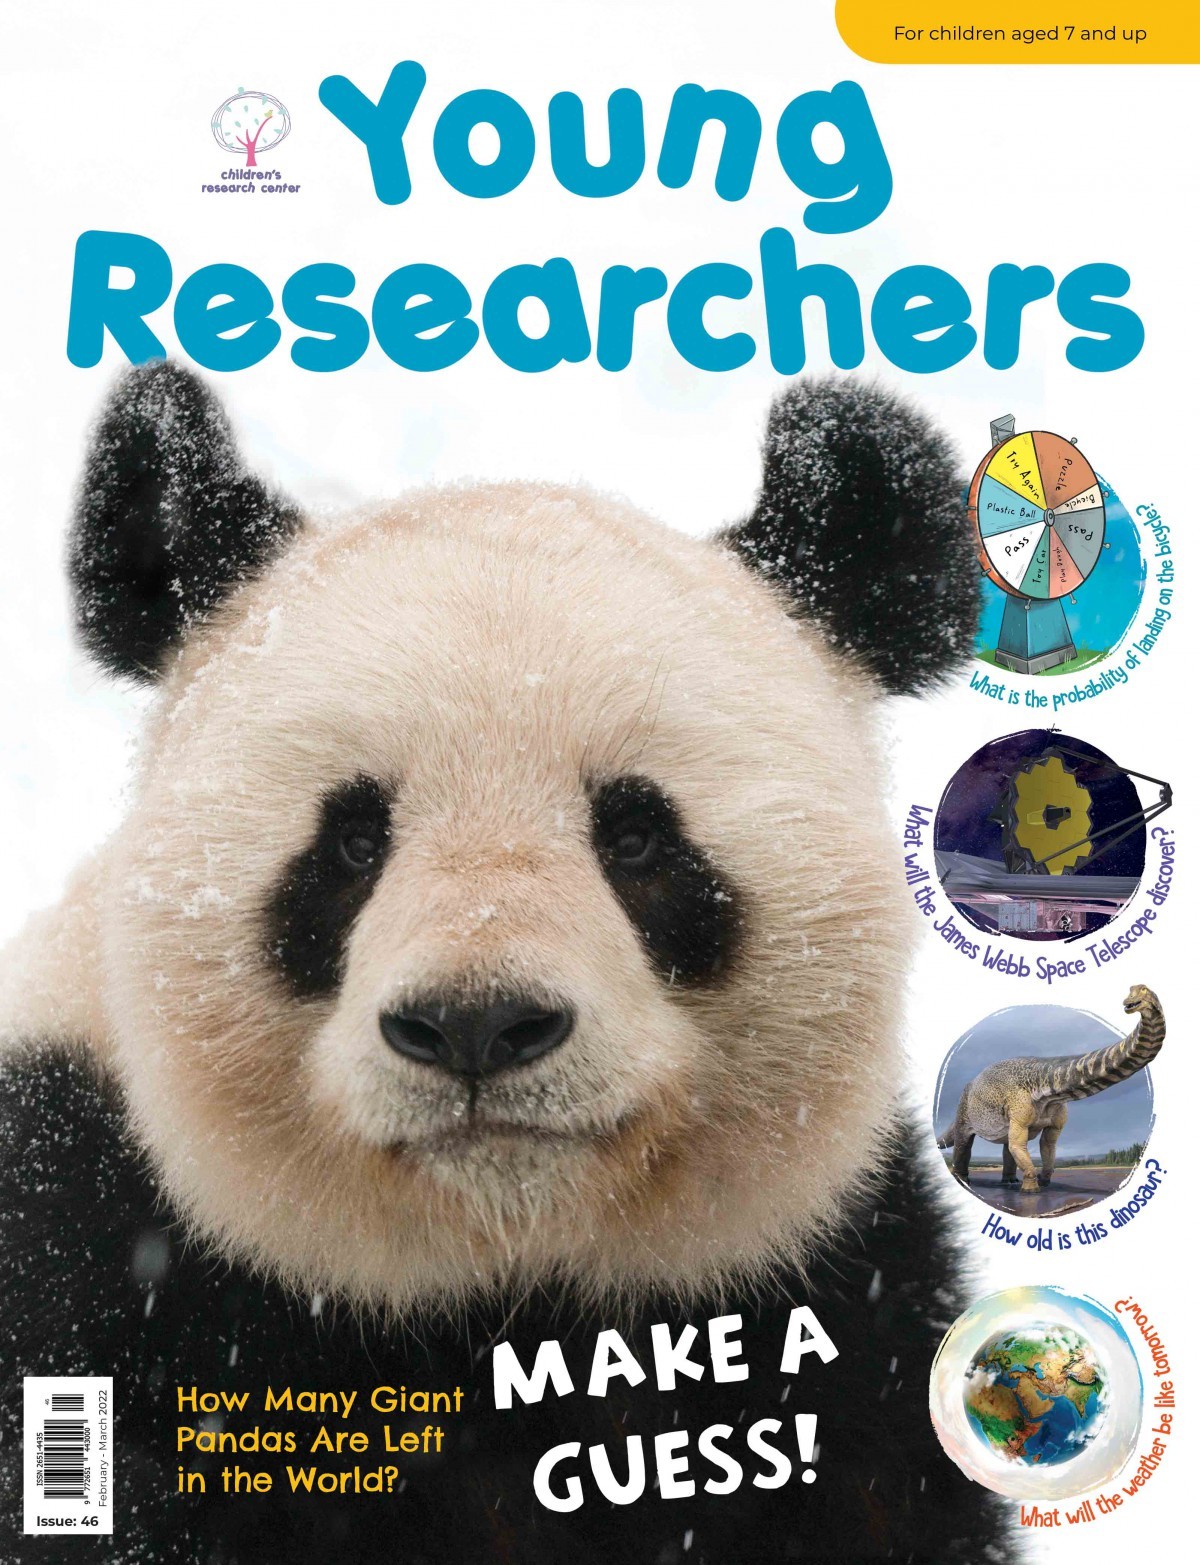 Young Researchers Issue 46: Make a Guess!